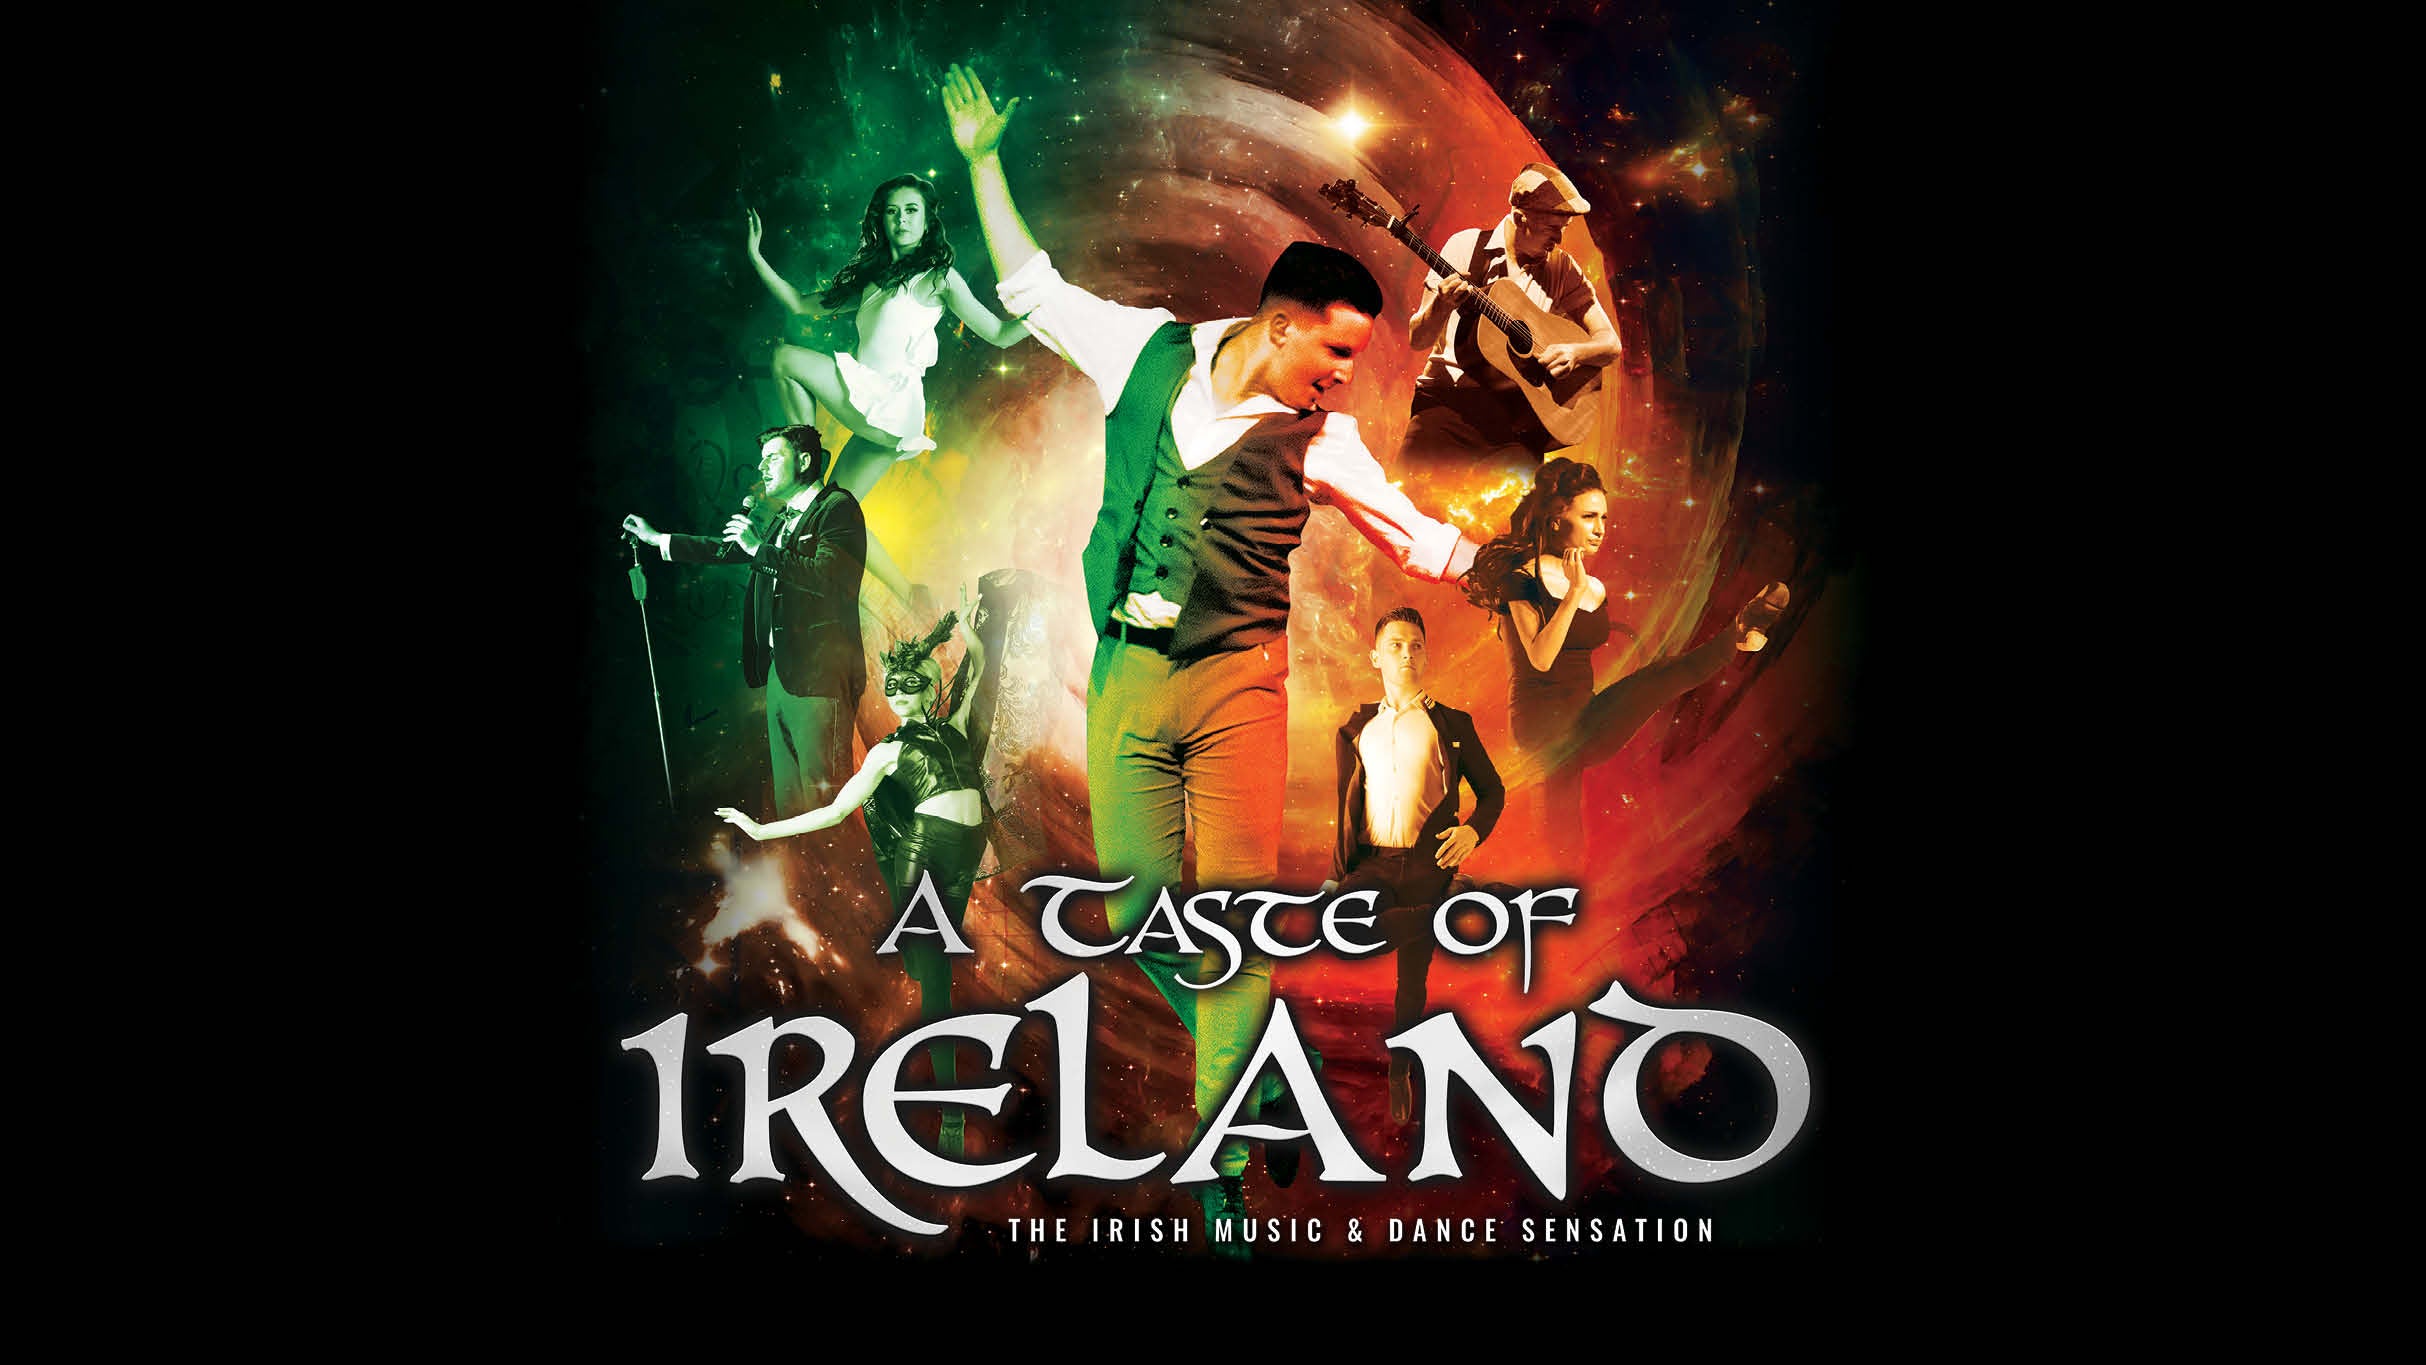 A Taste of Ireland in Wellington promo photo for Exclusive presale offer code